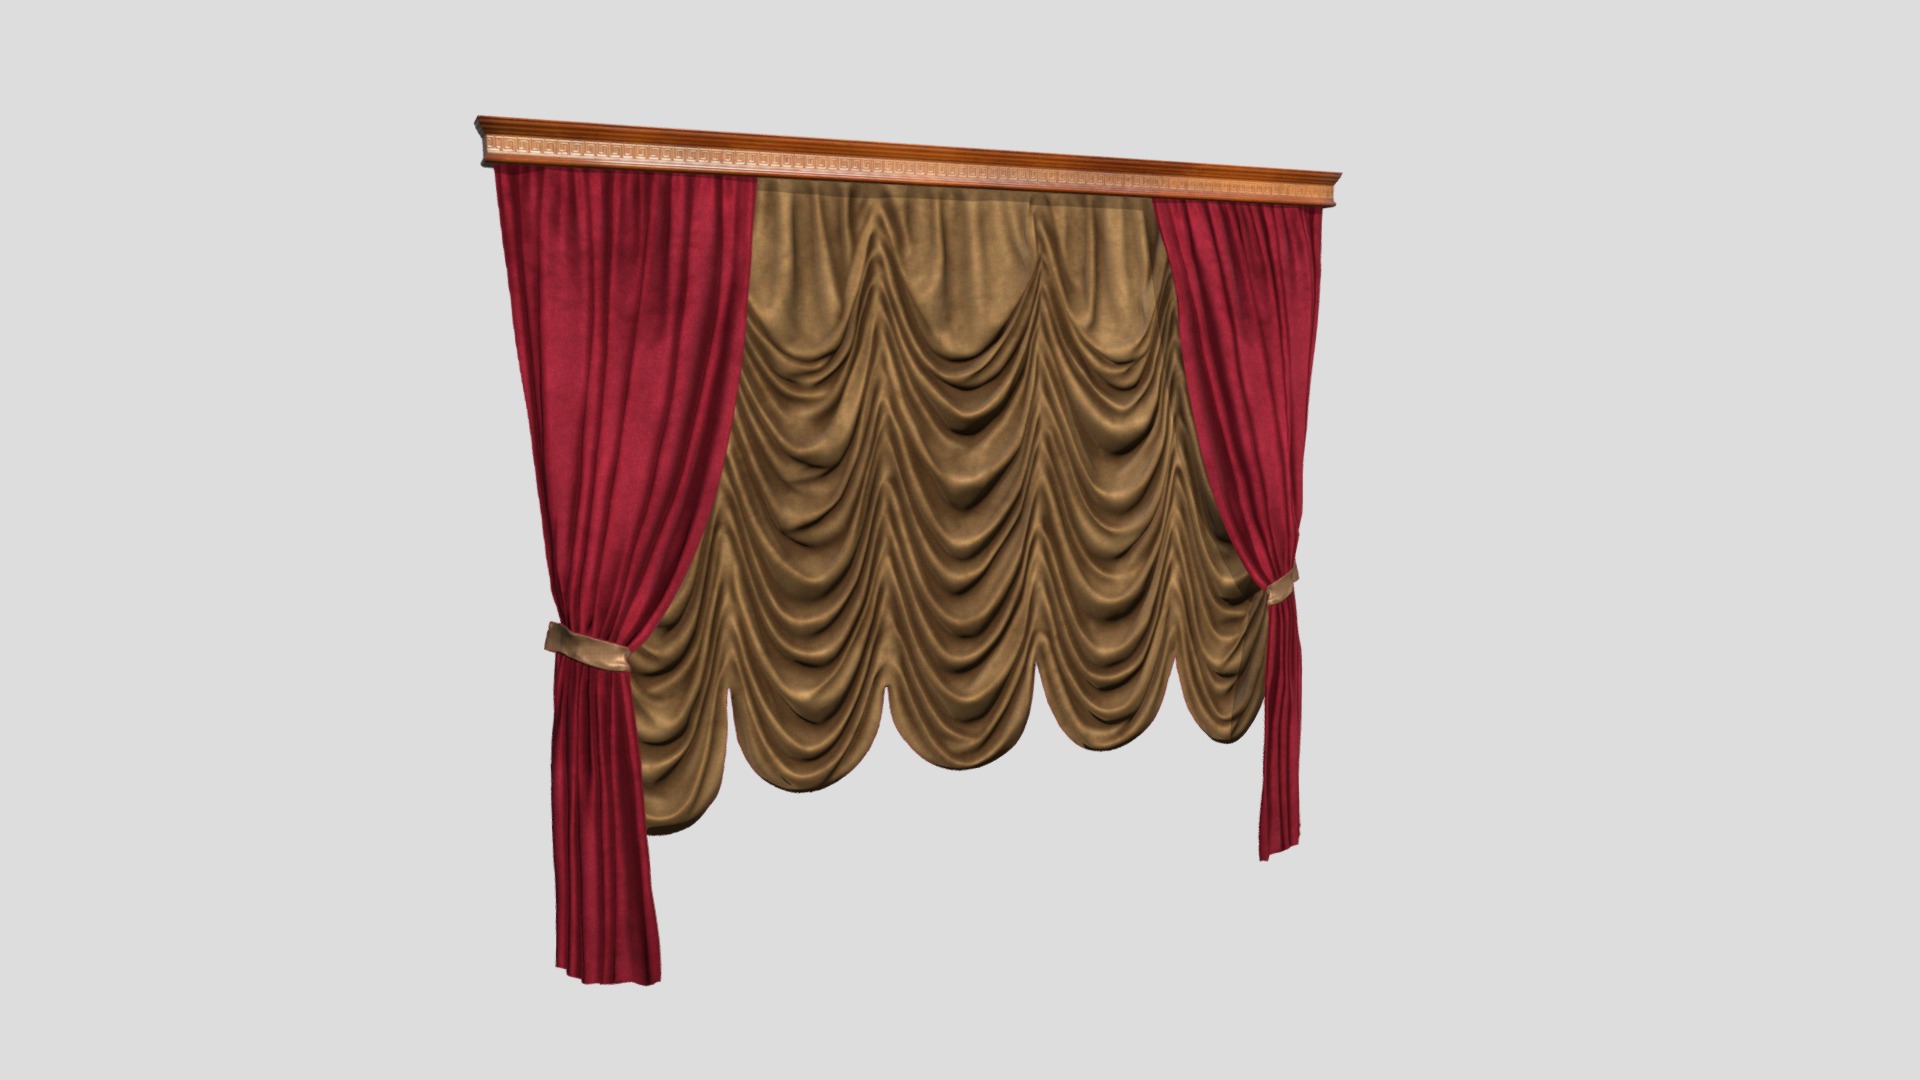 3D model №1002 Curtain 3D low poly model for VR-projects - This is a 3D model of the №1002 Curtain 3D low poly model for VR-projects. The 3D model is about a red curtain with a red bow.